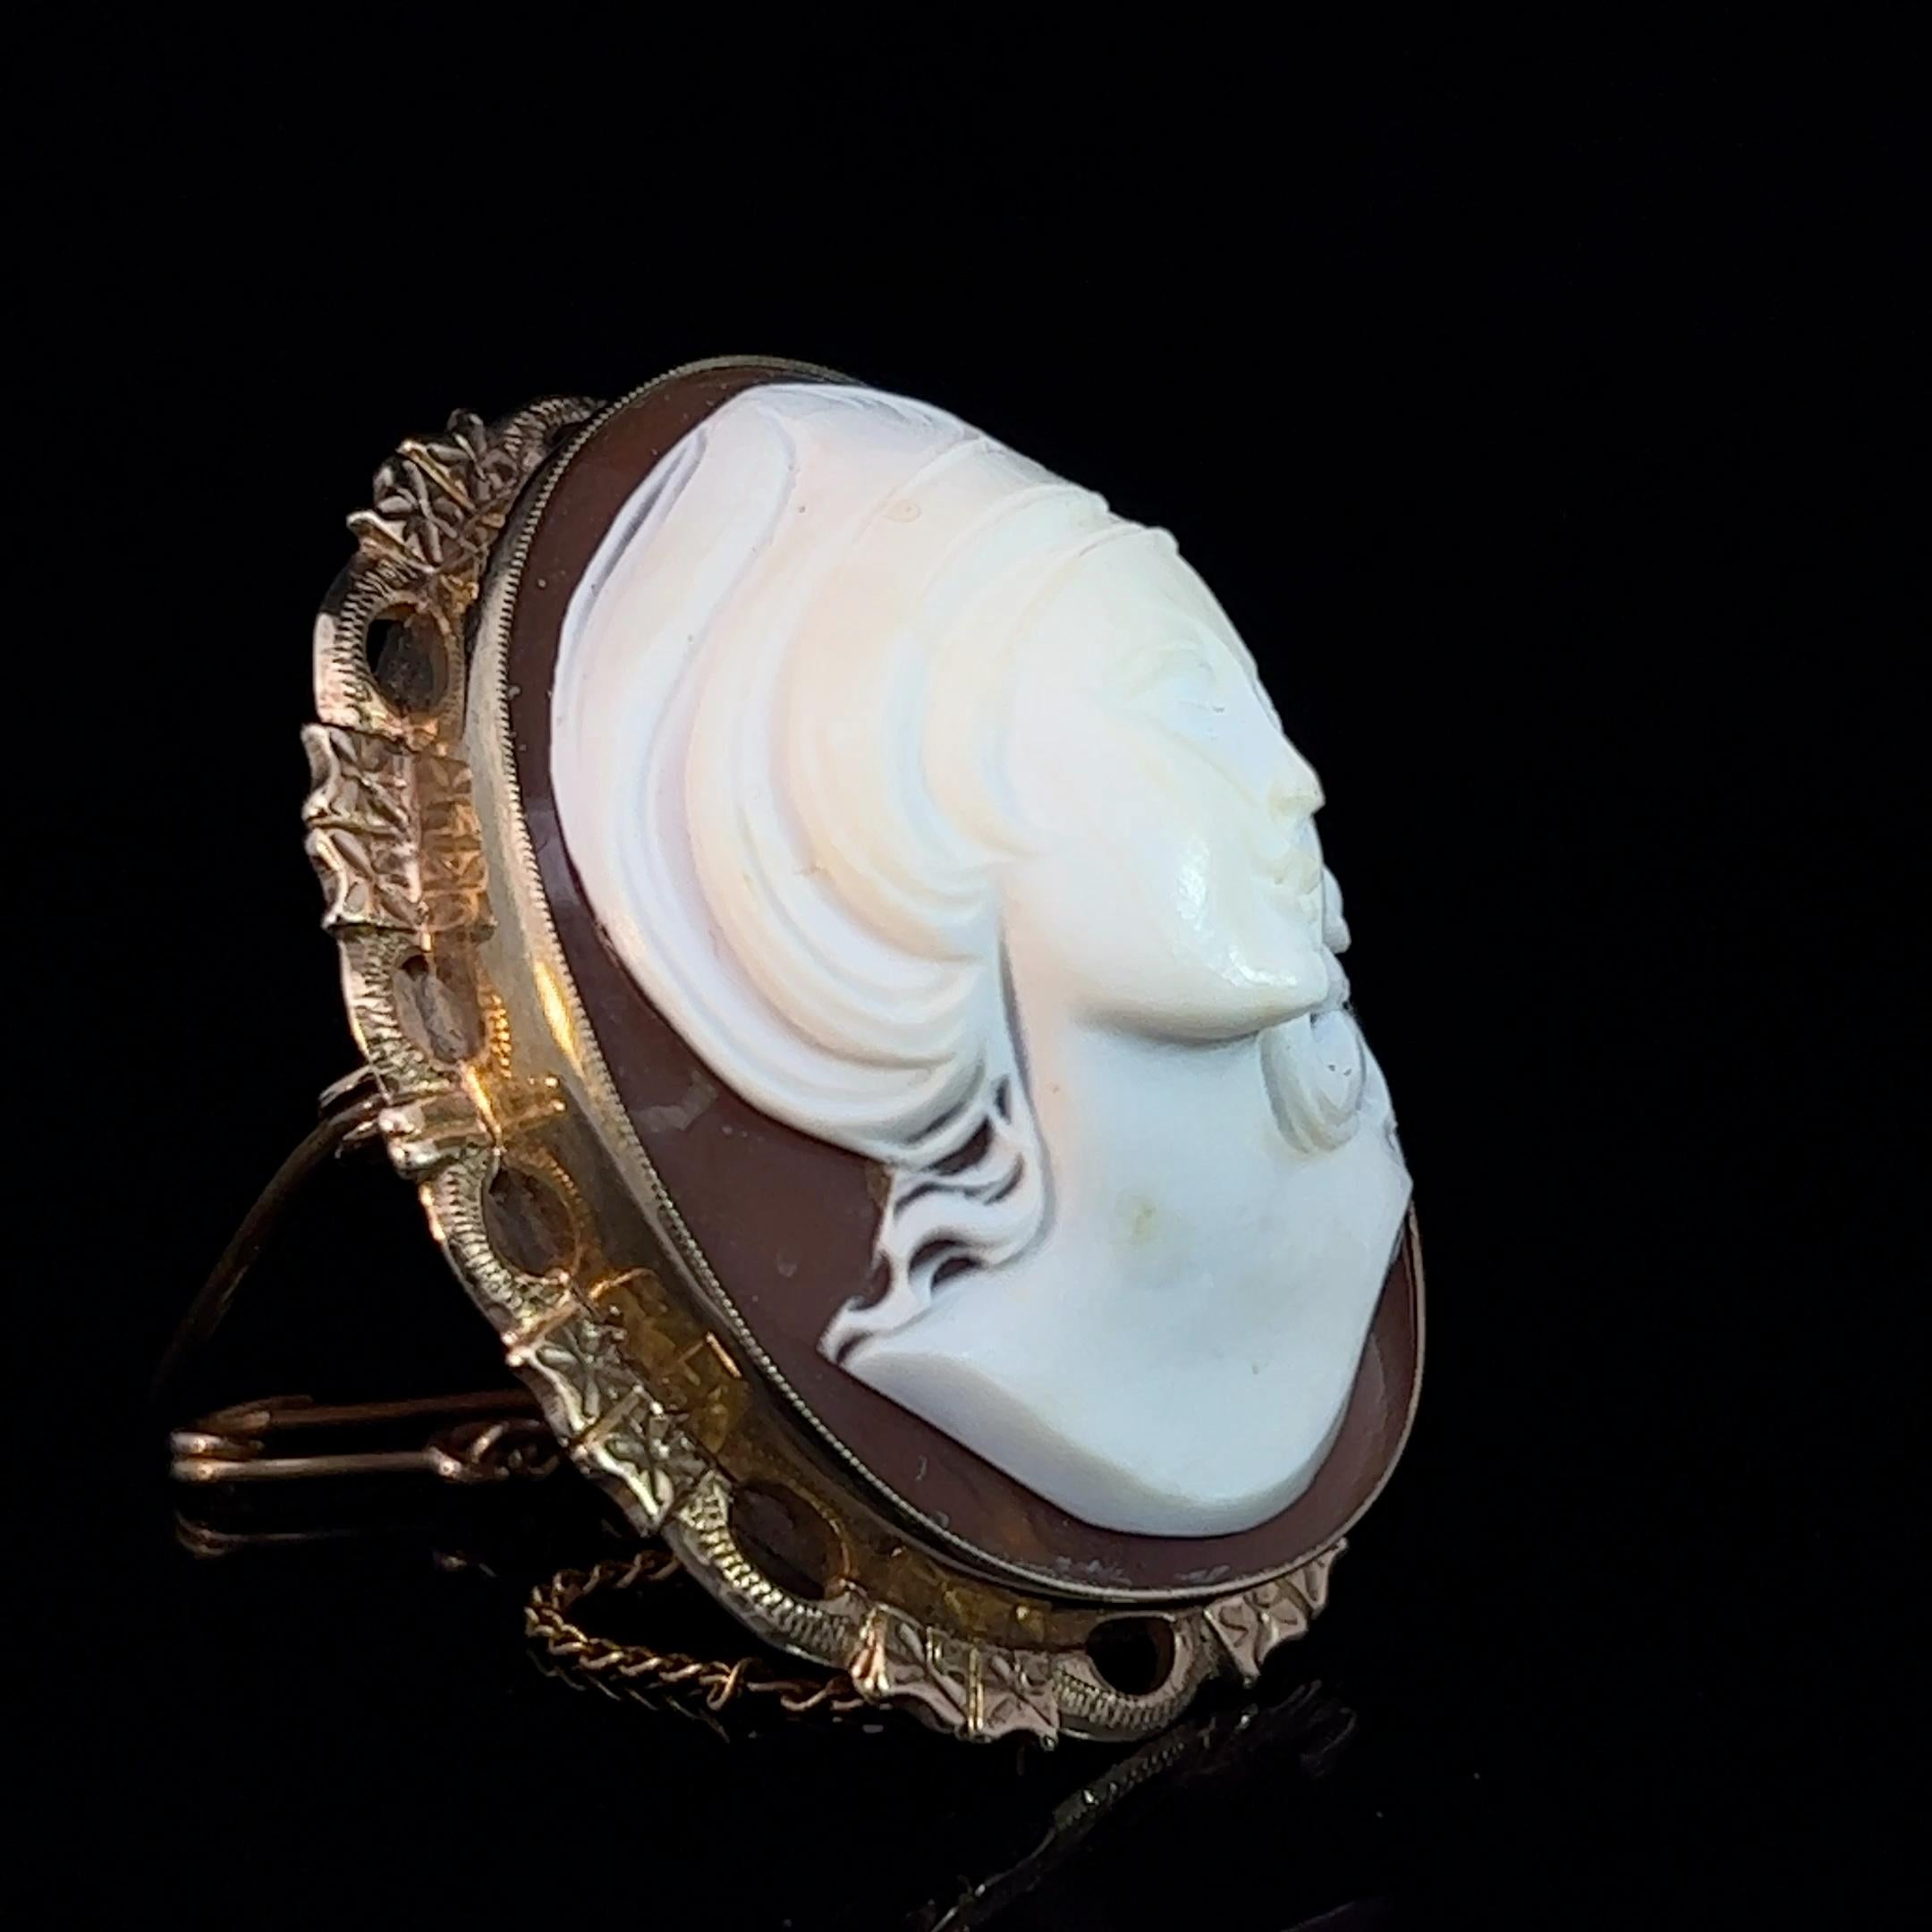 Mid 20th Century cameo brooch. This shell carved cameo of a woman in high relief is beautiful. Fitted with a metal pin and safety chain with pin.

Gemstone: Shell cameo (3.4cm x 2.7cm)
Metal: 9k yellow gold
Weight: 15.09 grams
Measurements: Length